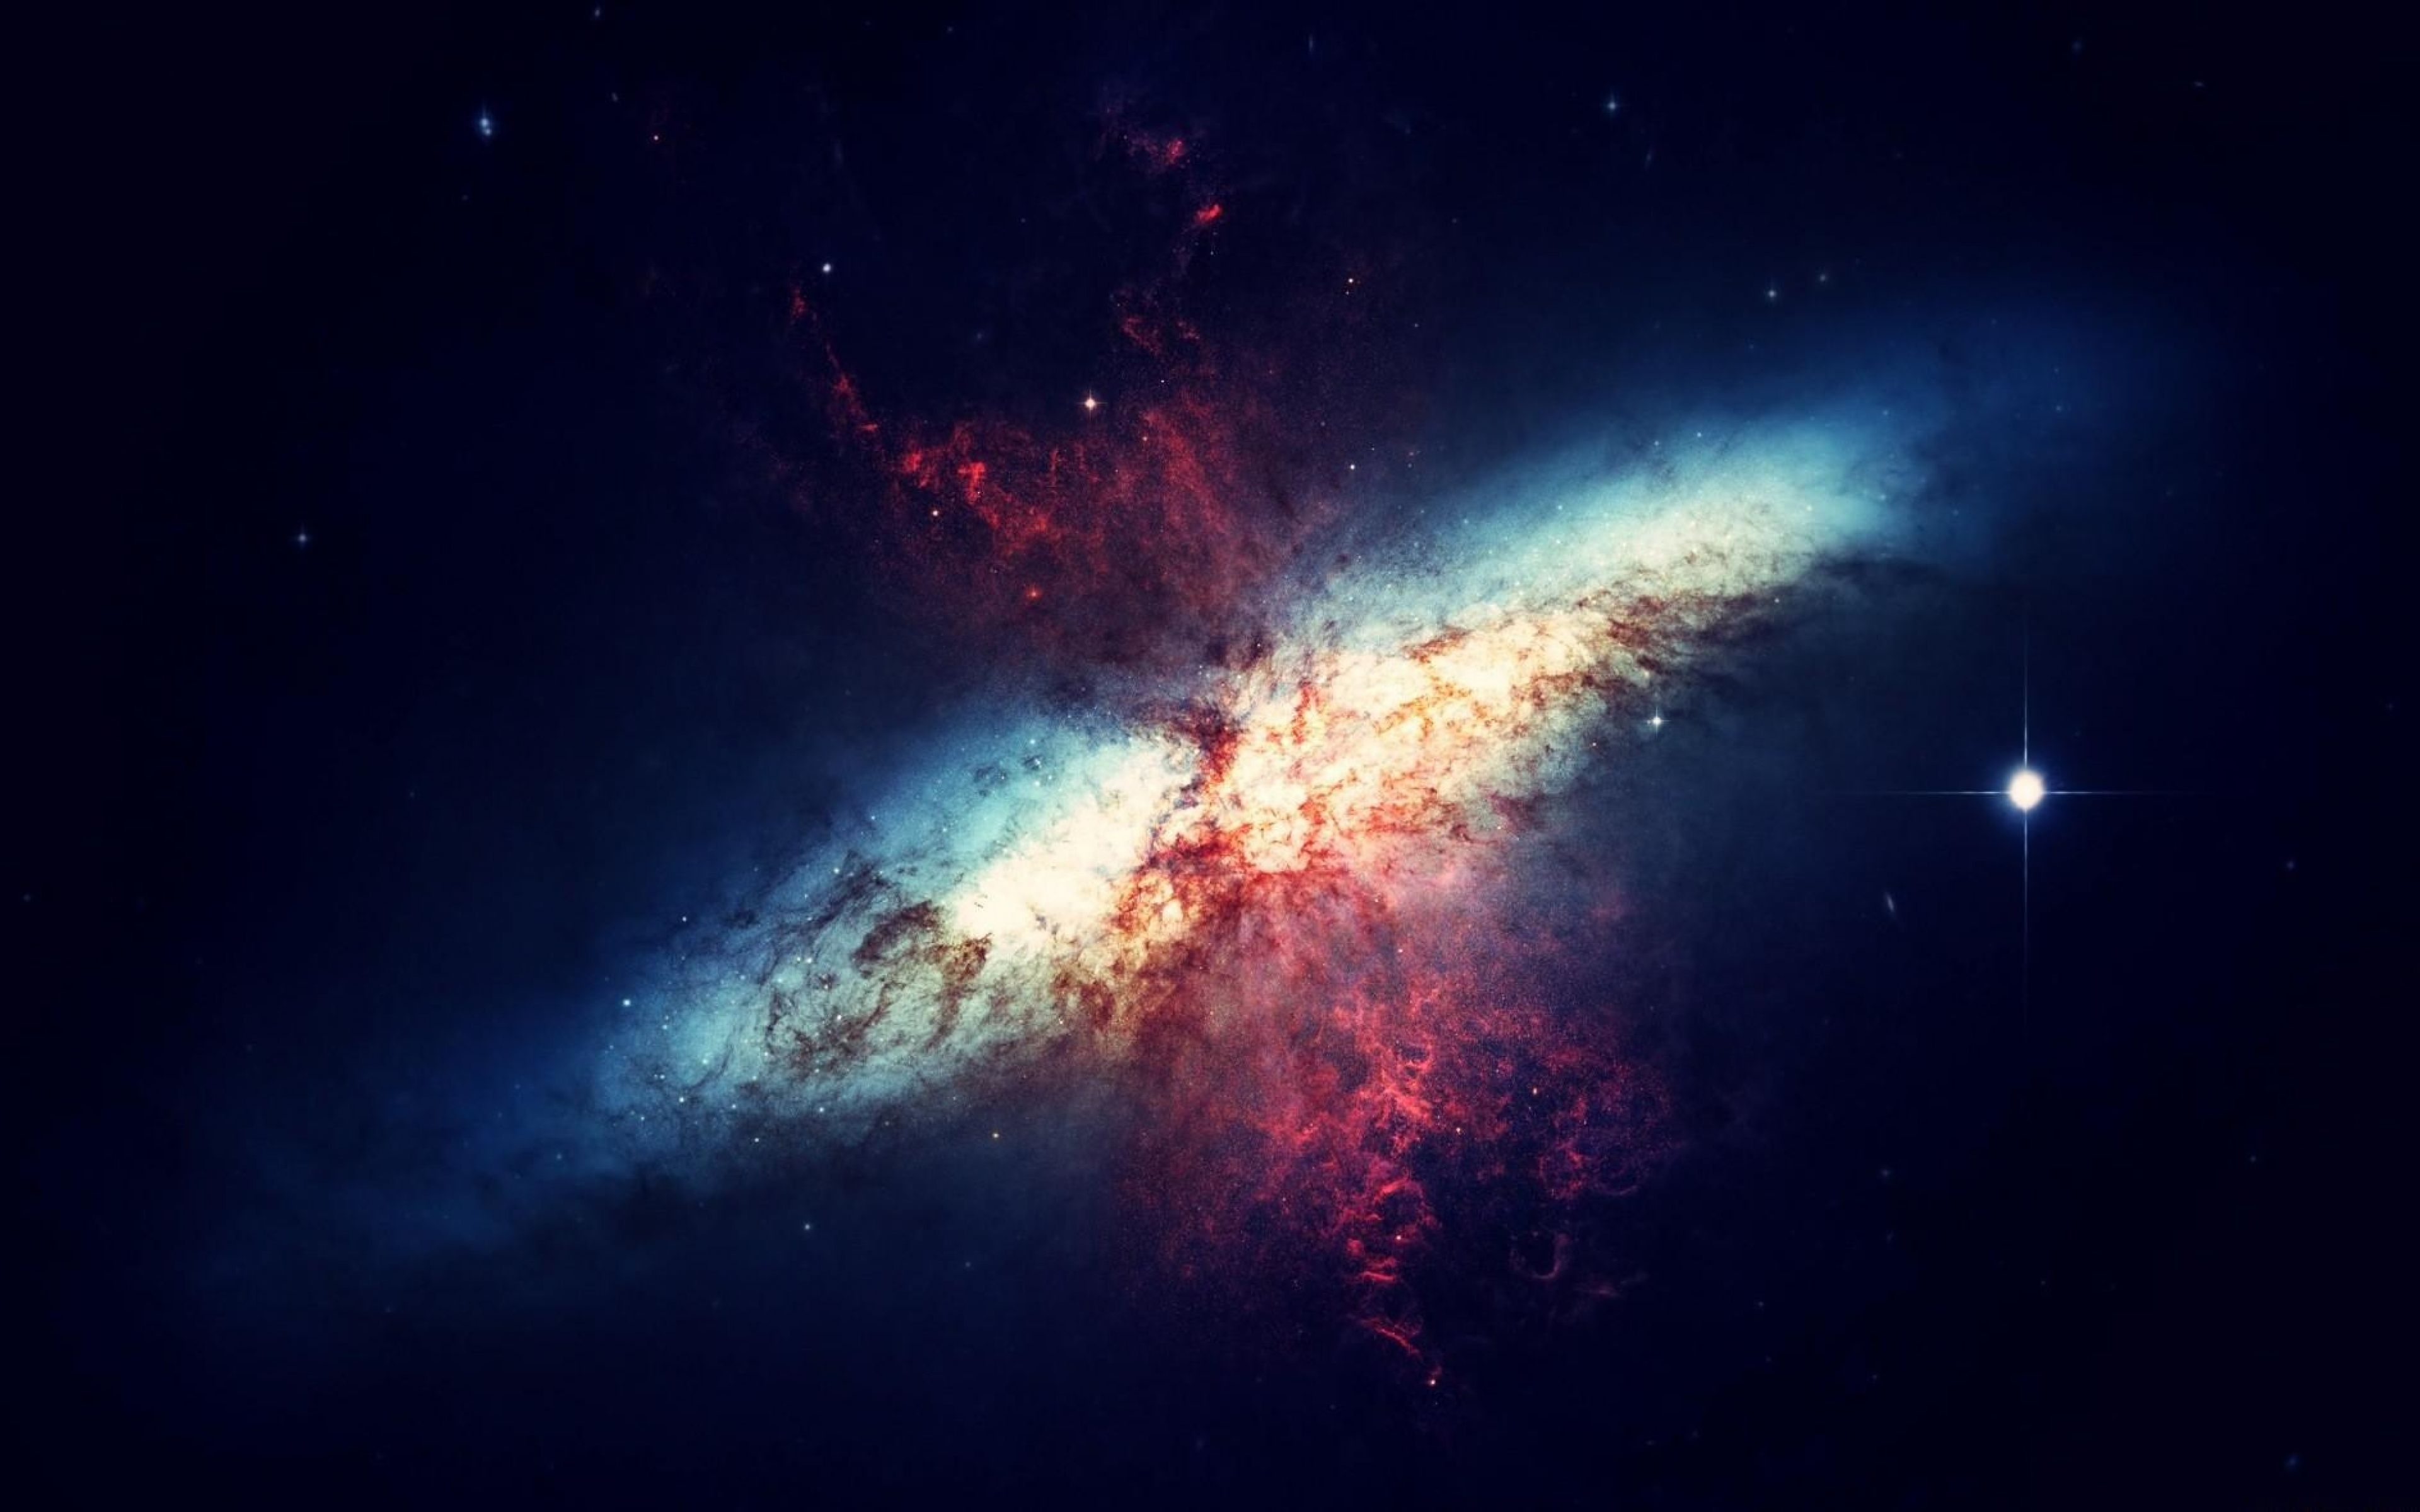 4k Space Awesome Wallpapers 11989 - HD Wallpapers Site